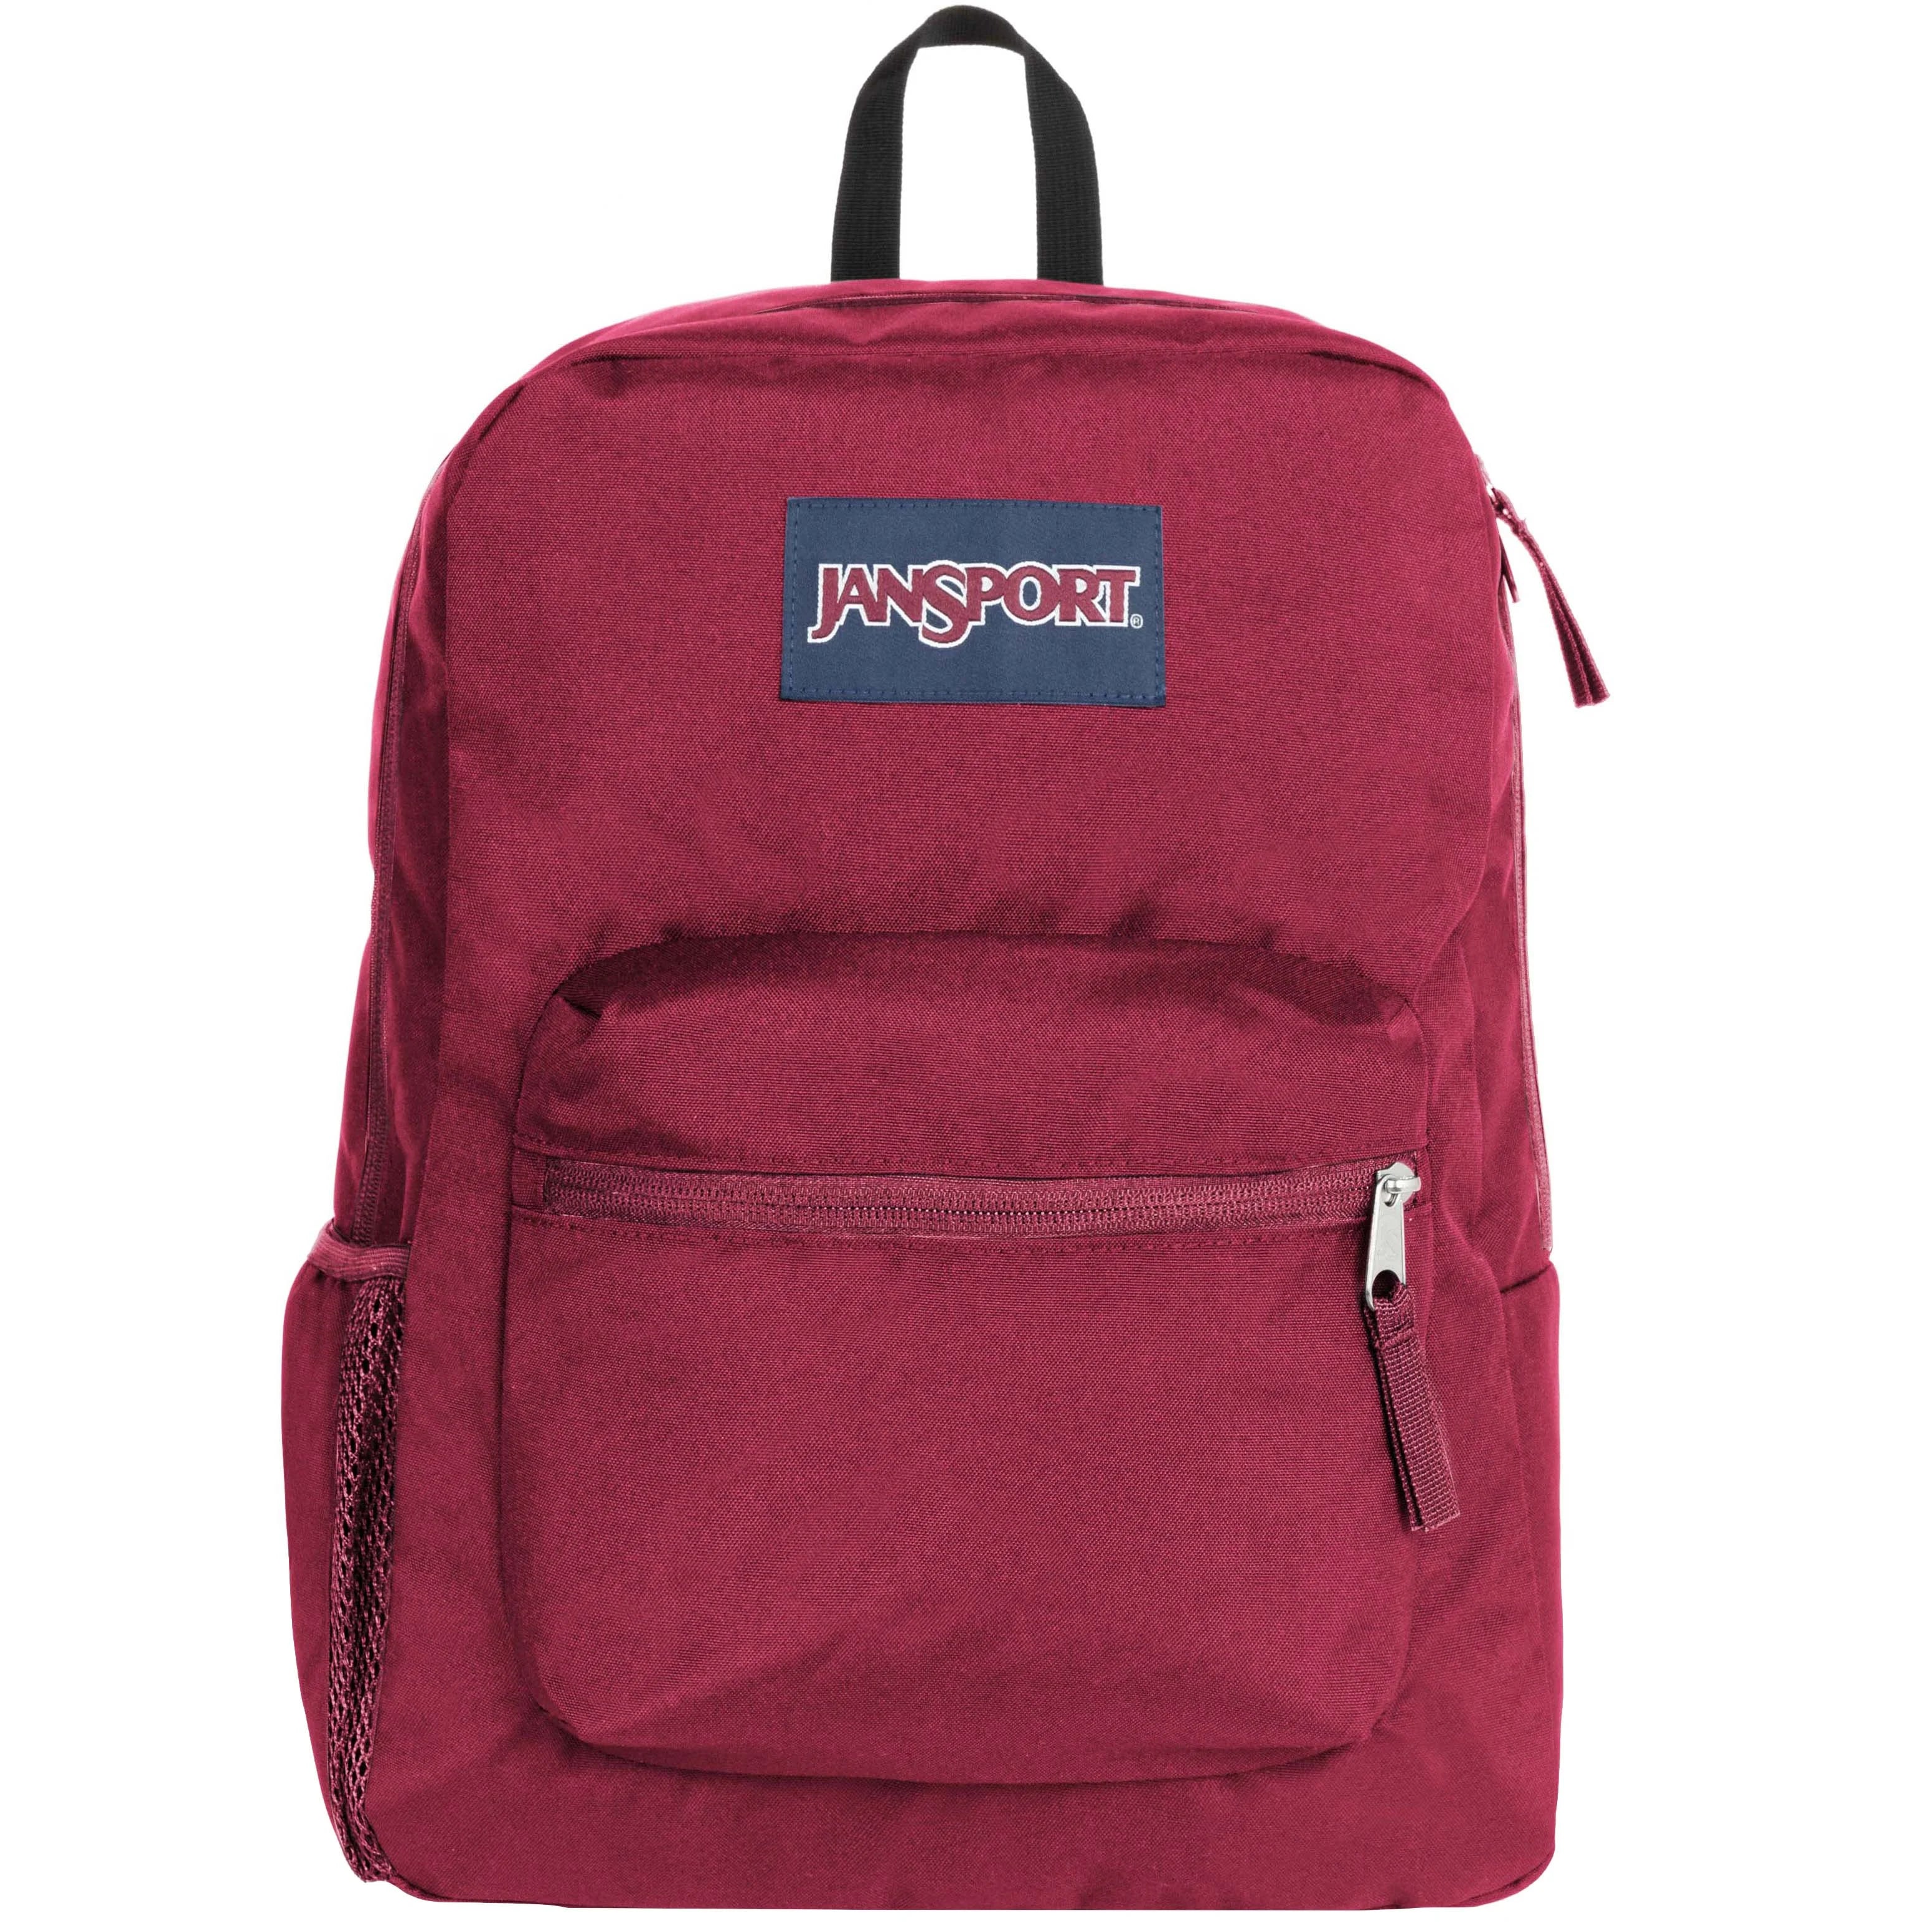 Jansport Cross Town Backpack 42 cm - Russet Red